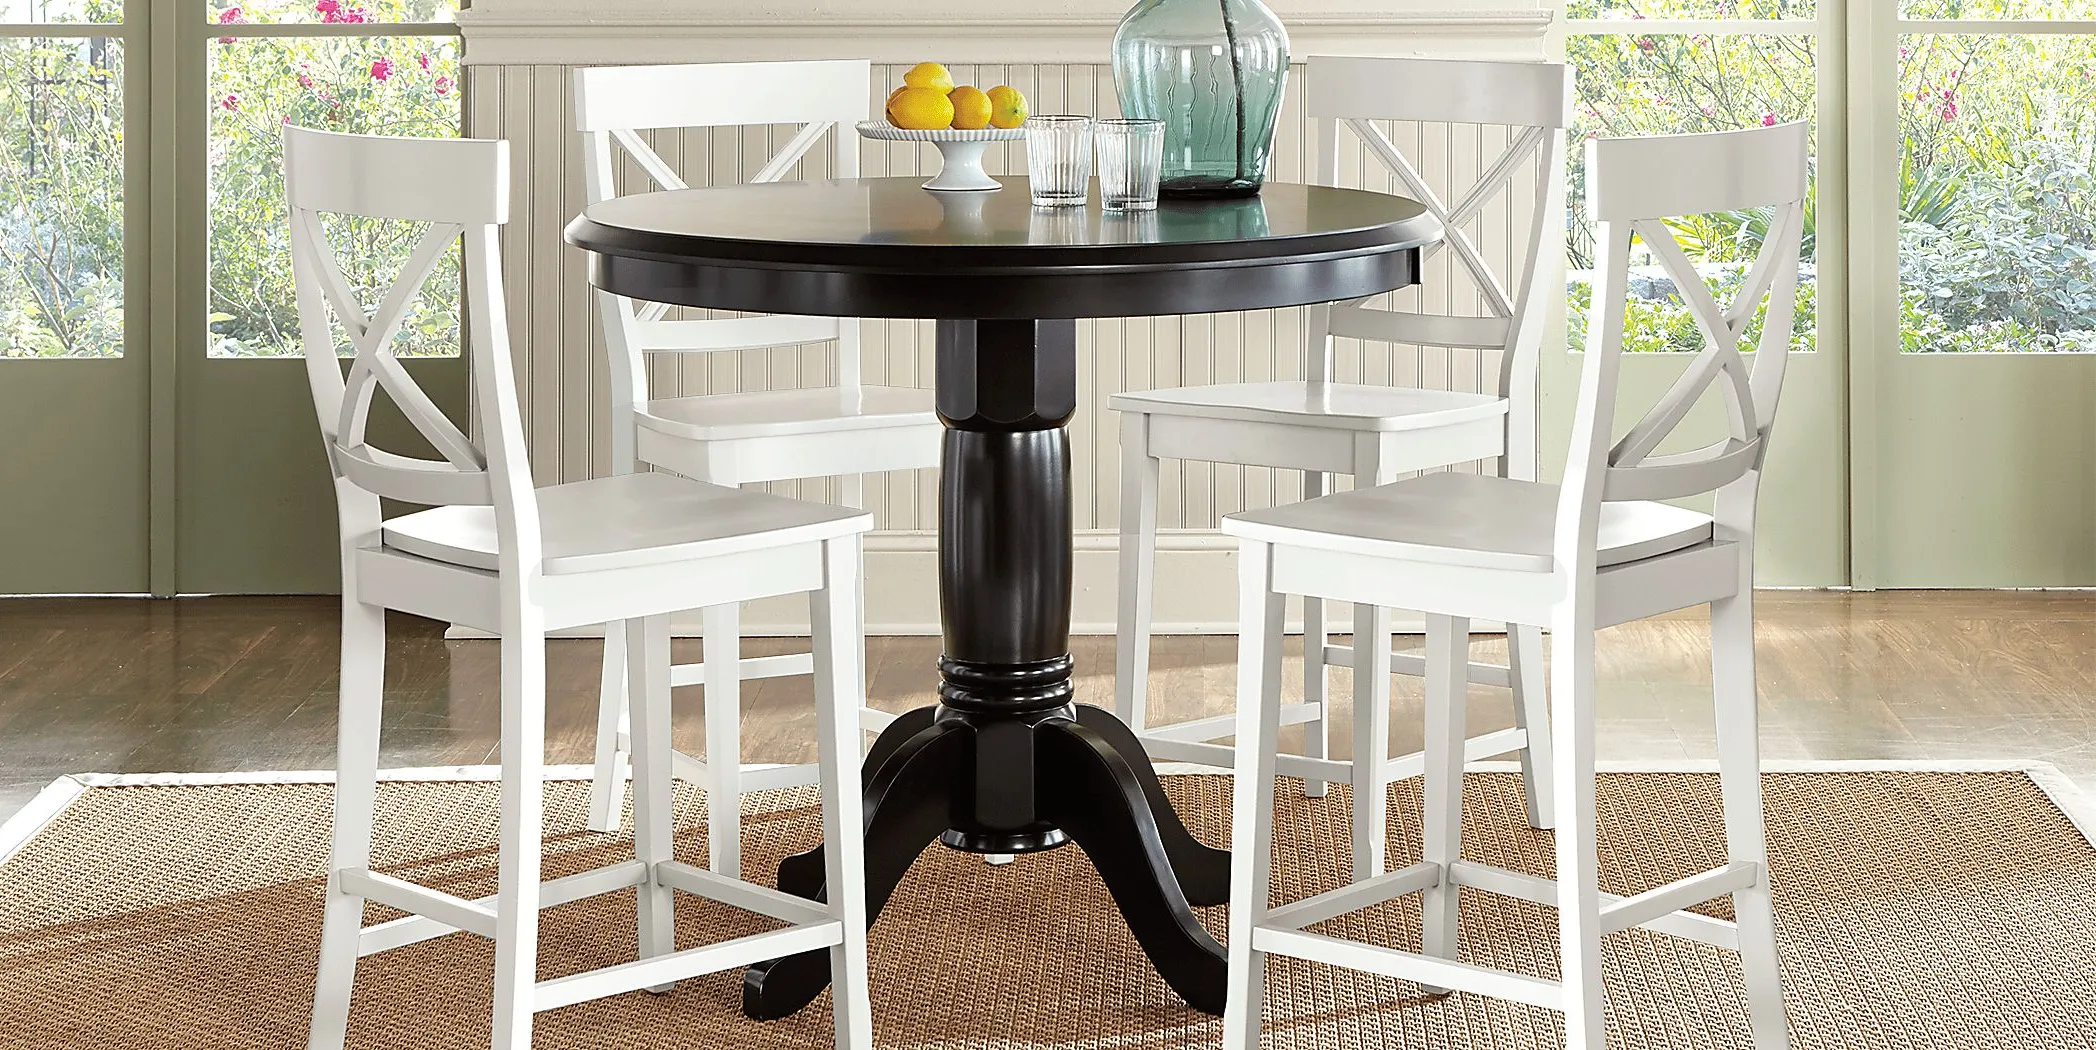 Brynwood Black 5 Pc Counter Height Dining Set with White Stools